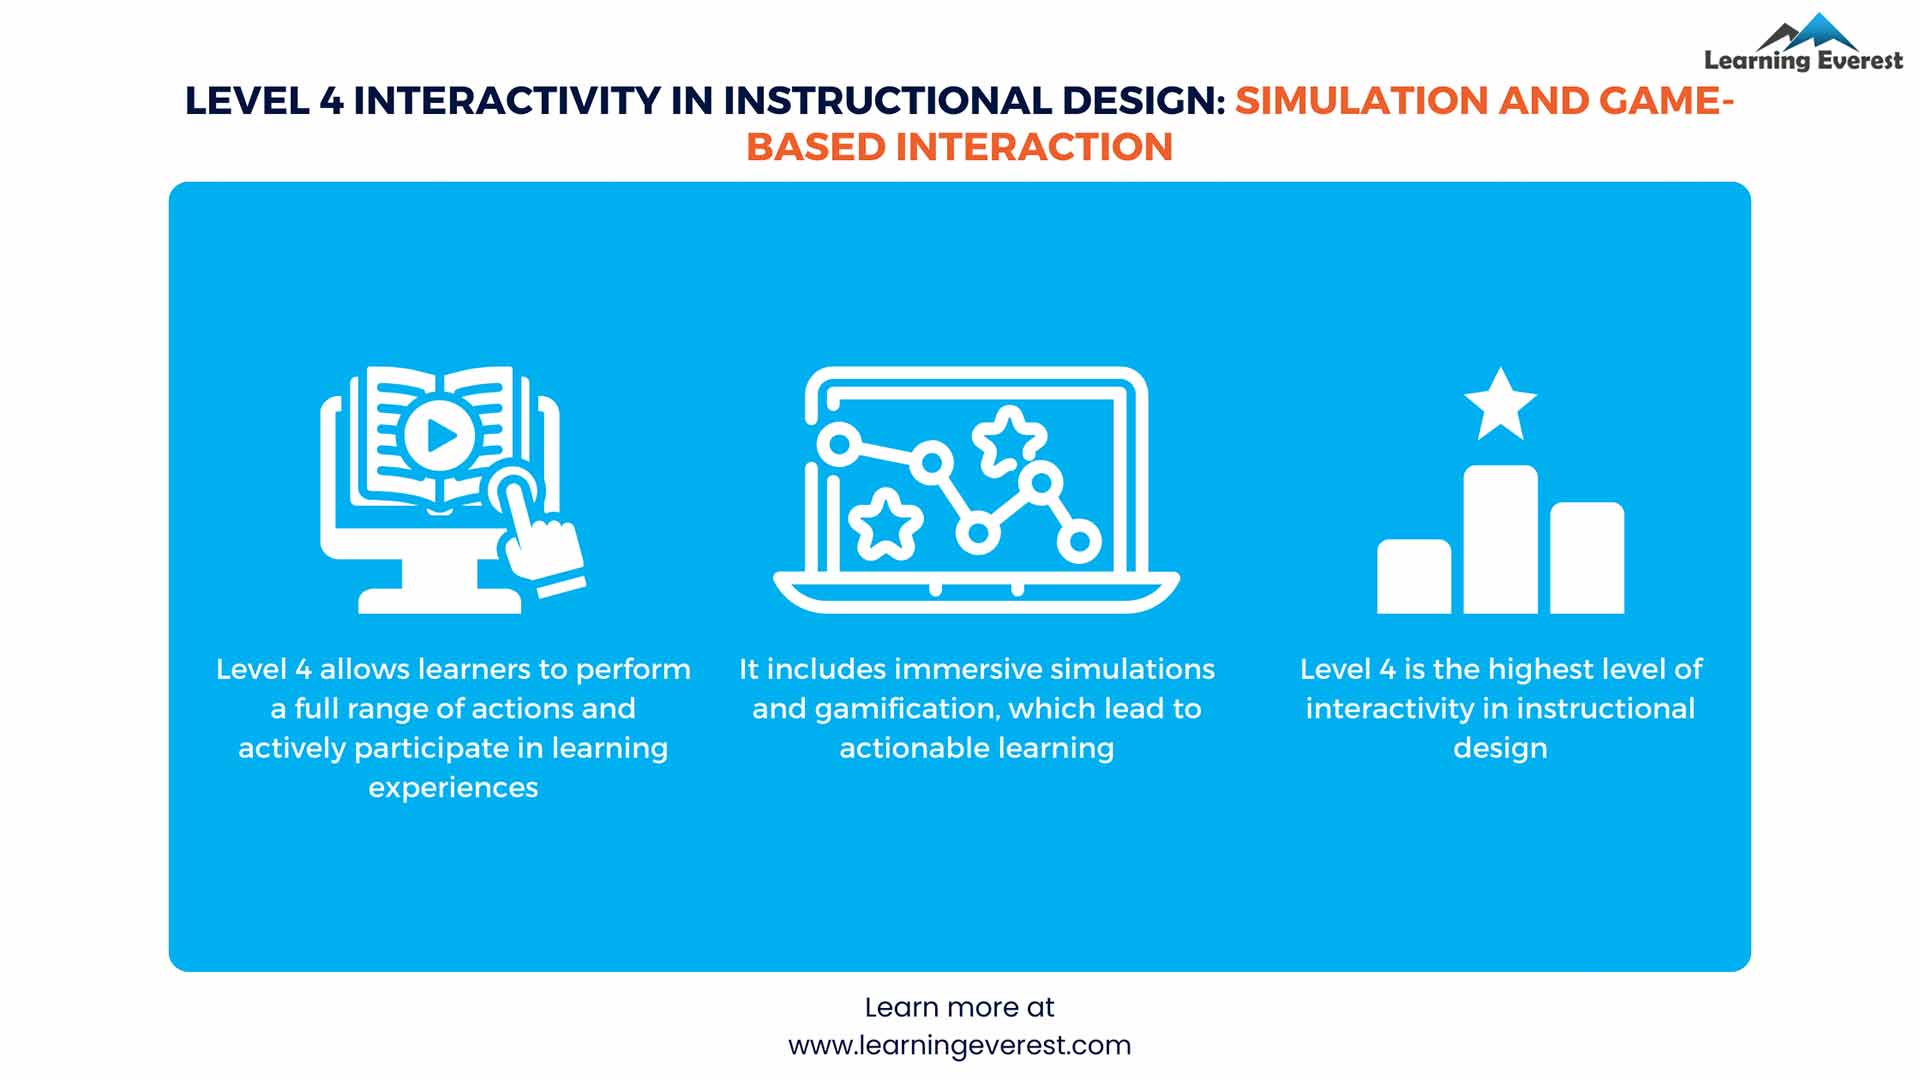 Level 4 Interactivity in Instructional Design - Simulation And Game-Based Interaction